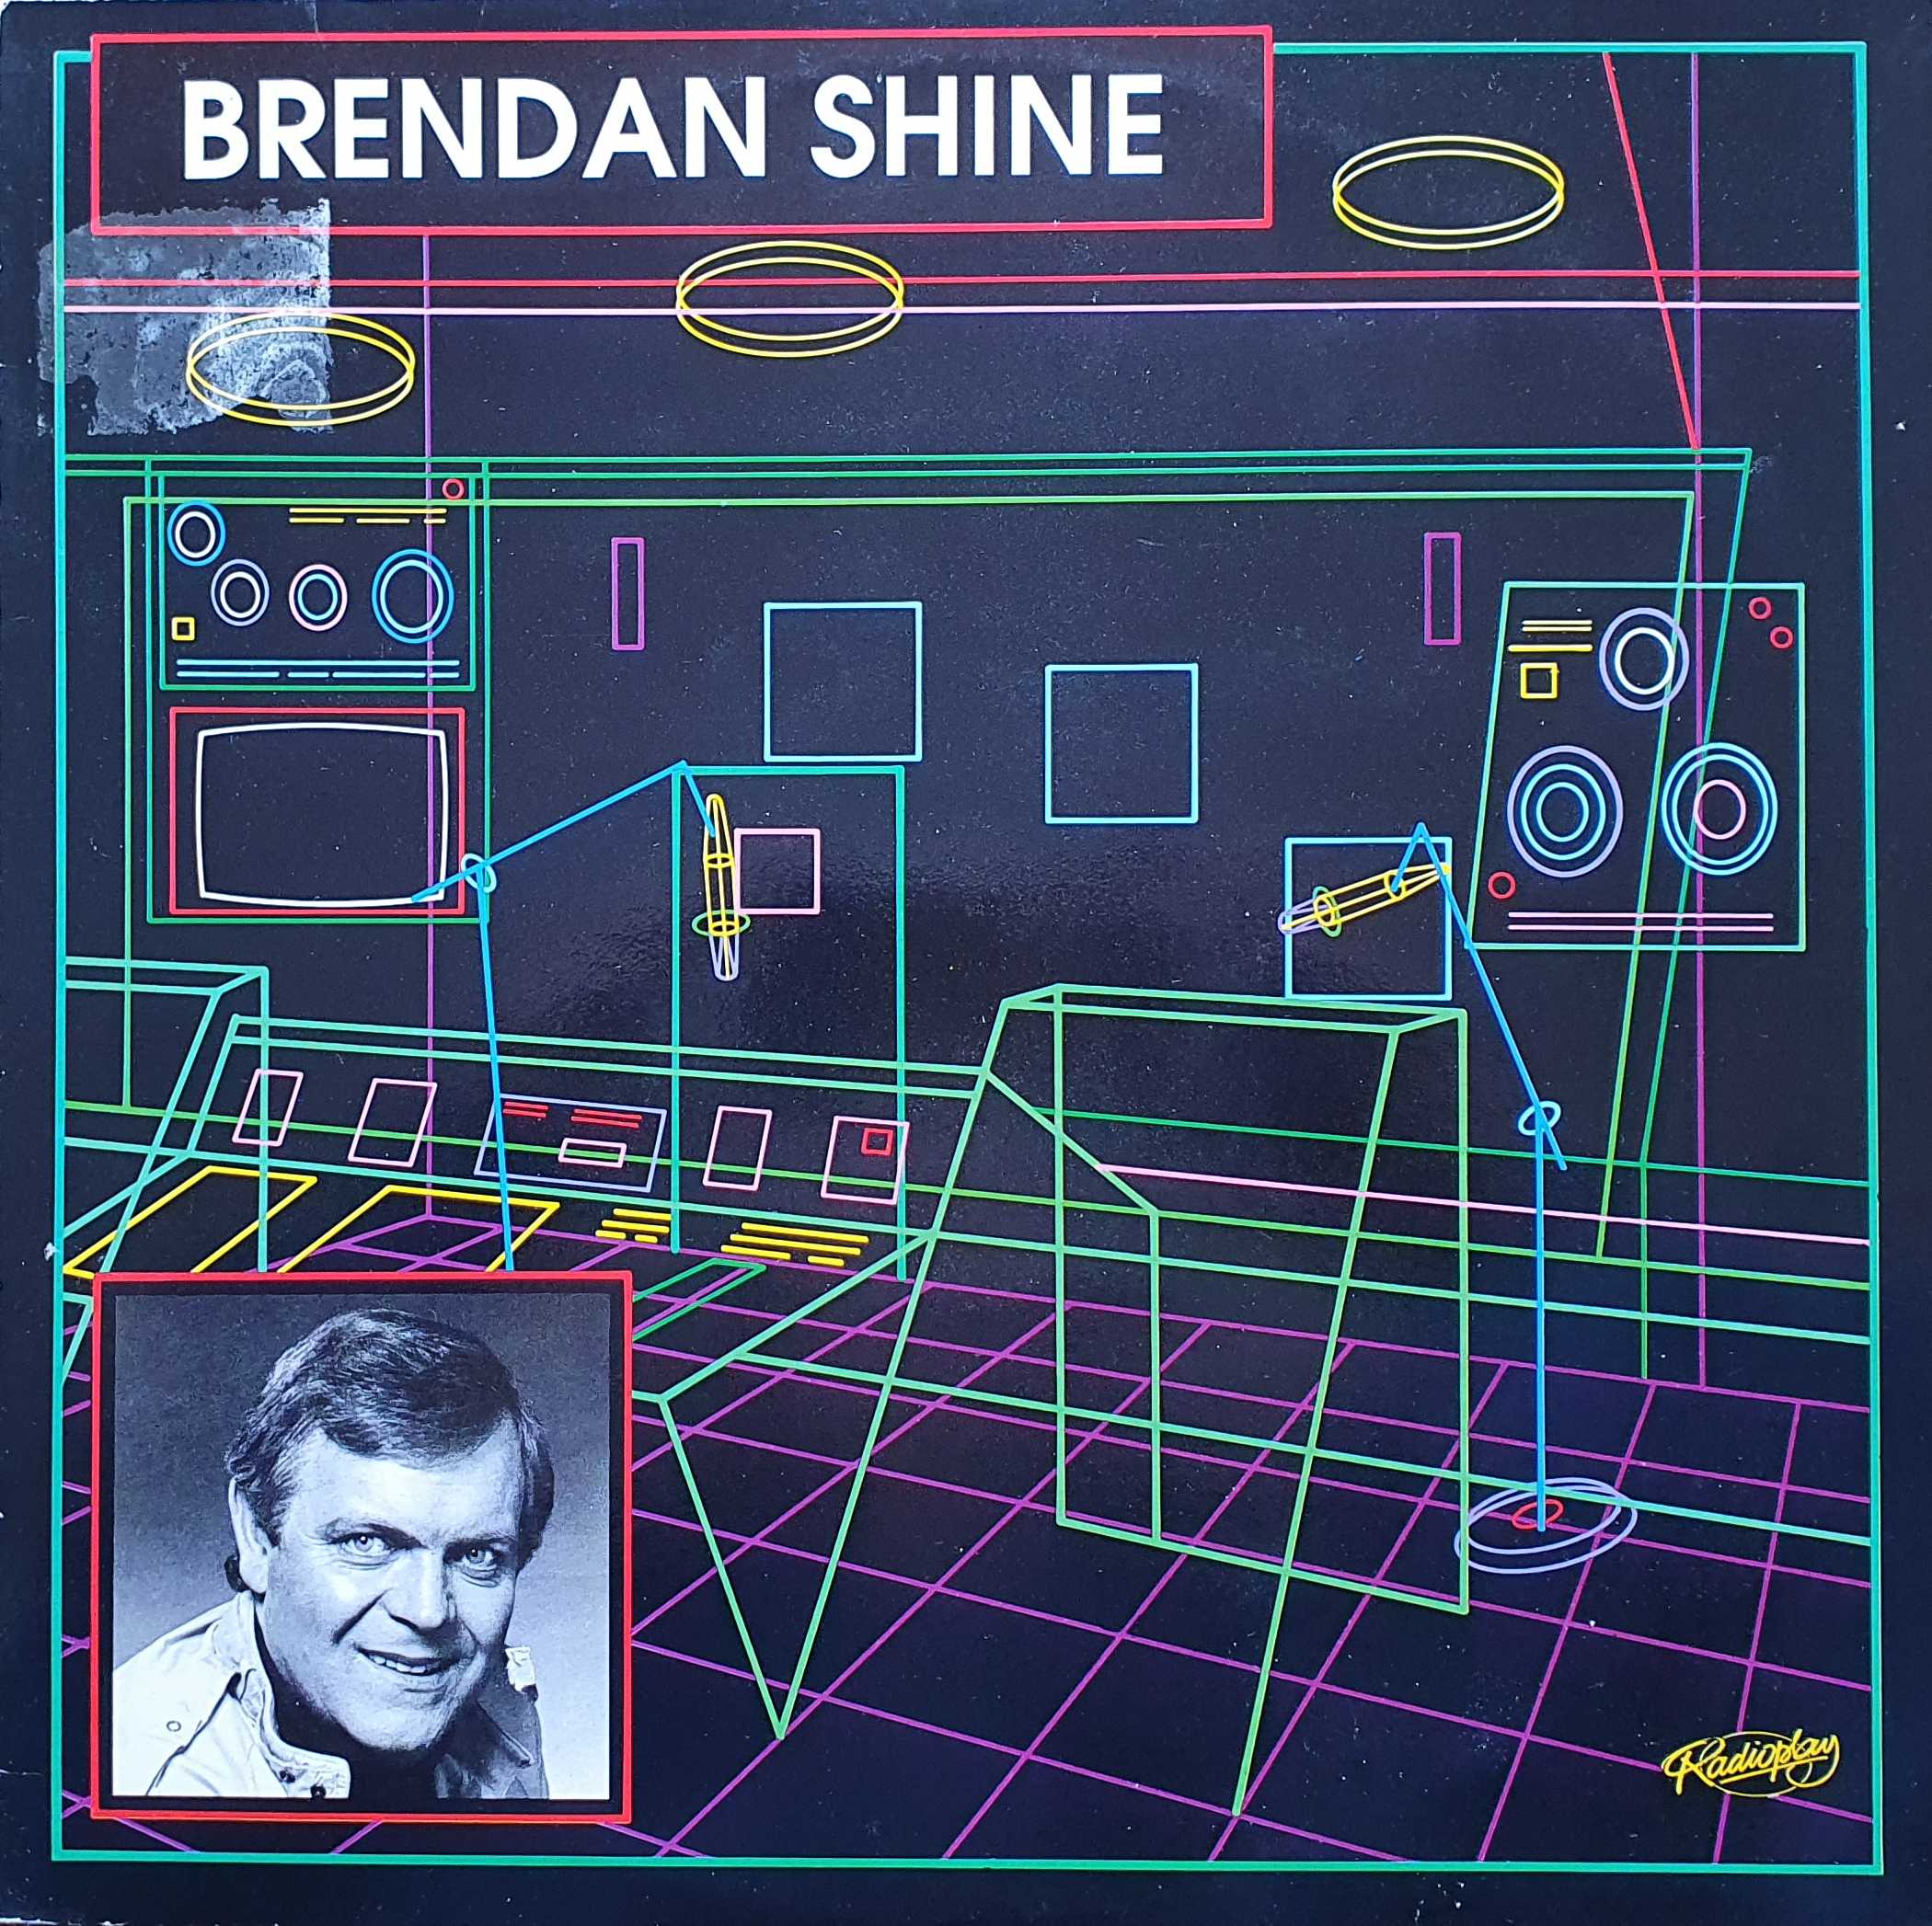 Picture of TAIR 87064 Brendan Shine by artist Brendan Shine from the BBC albums - Records and Tapes library